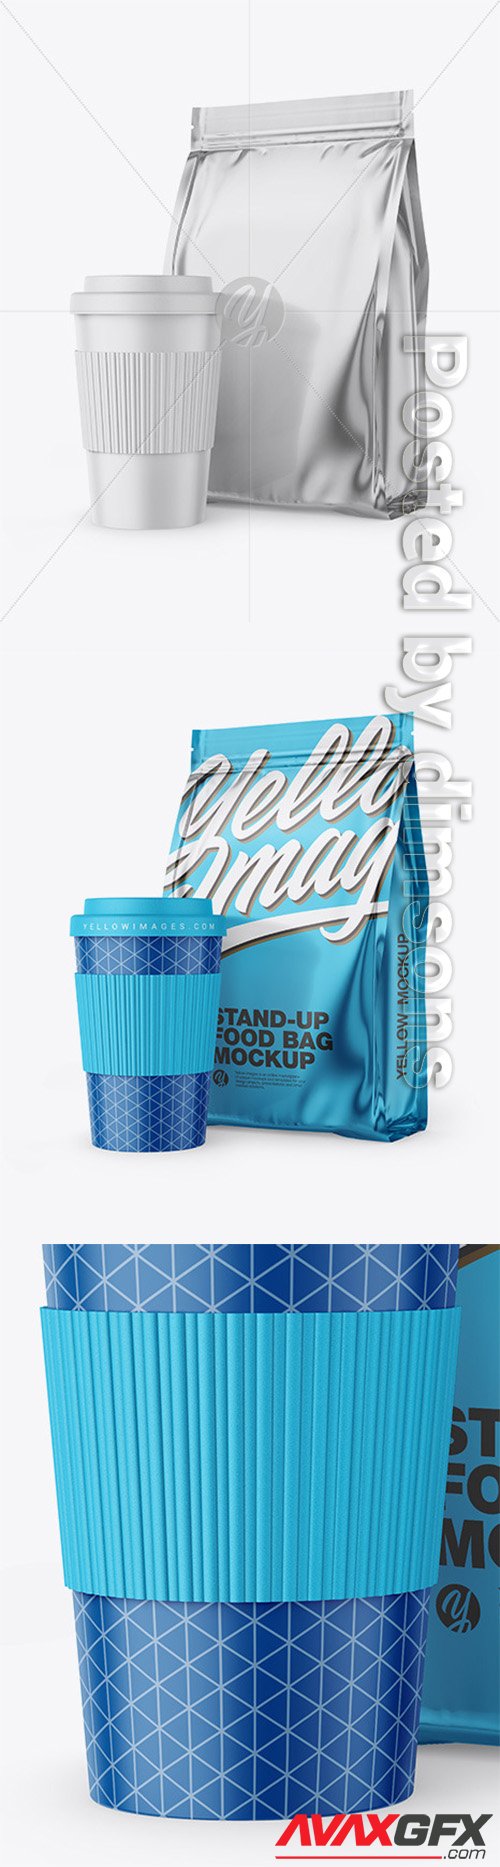 Download Metallic Coffee Bag Mockup Front View 66609 Avaxgfx All Downloads That You Need In One Place Graphic From Nitroflare Rapidgator Yellowimages Mockups